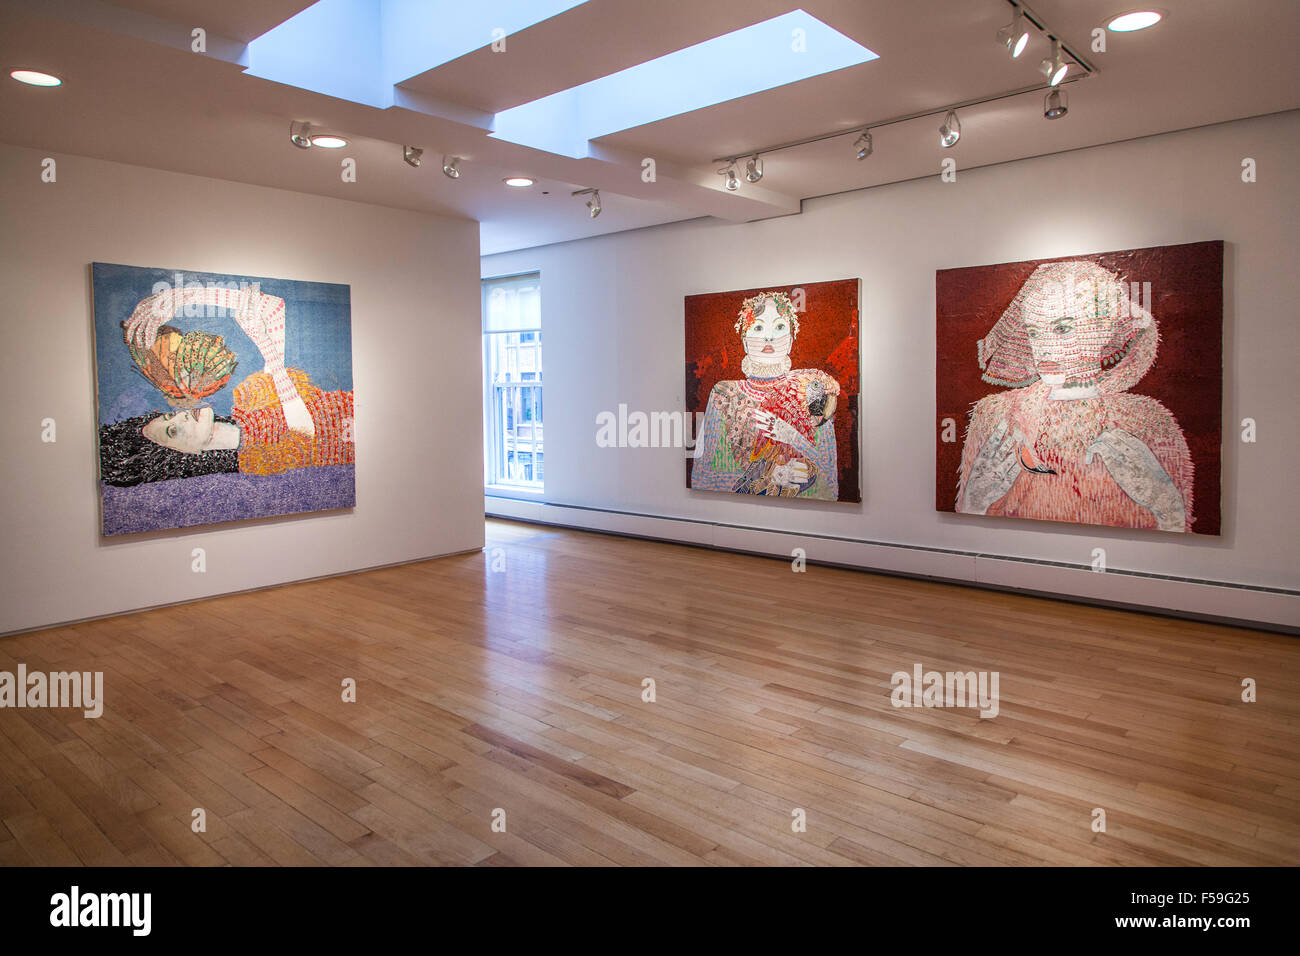 Maria Berrio show at the Praxis gallery, Chelsea, New York city, United States of America. Stock Photo